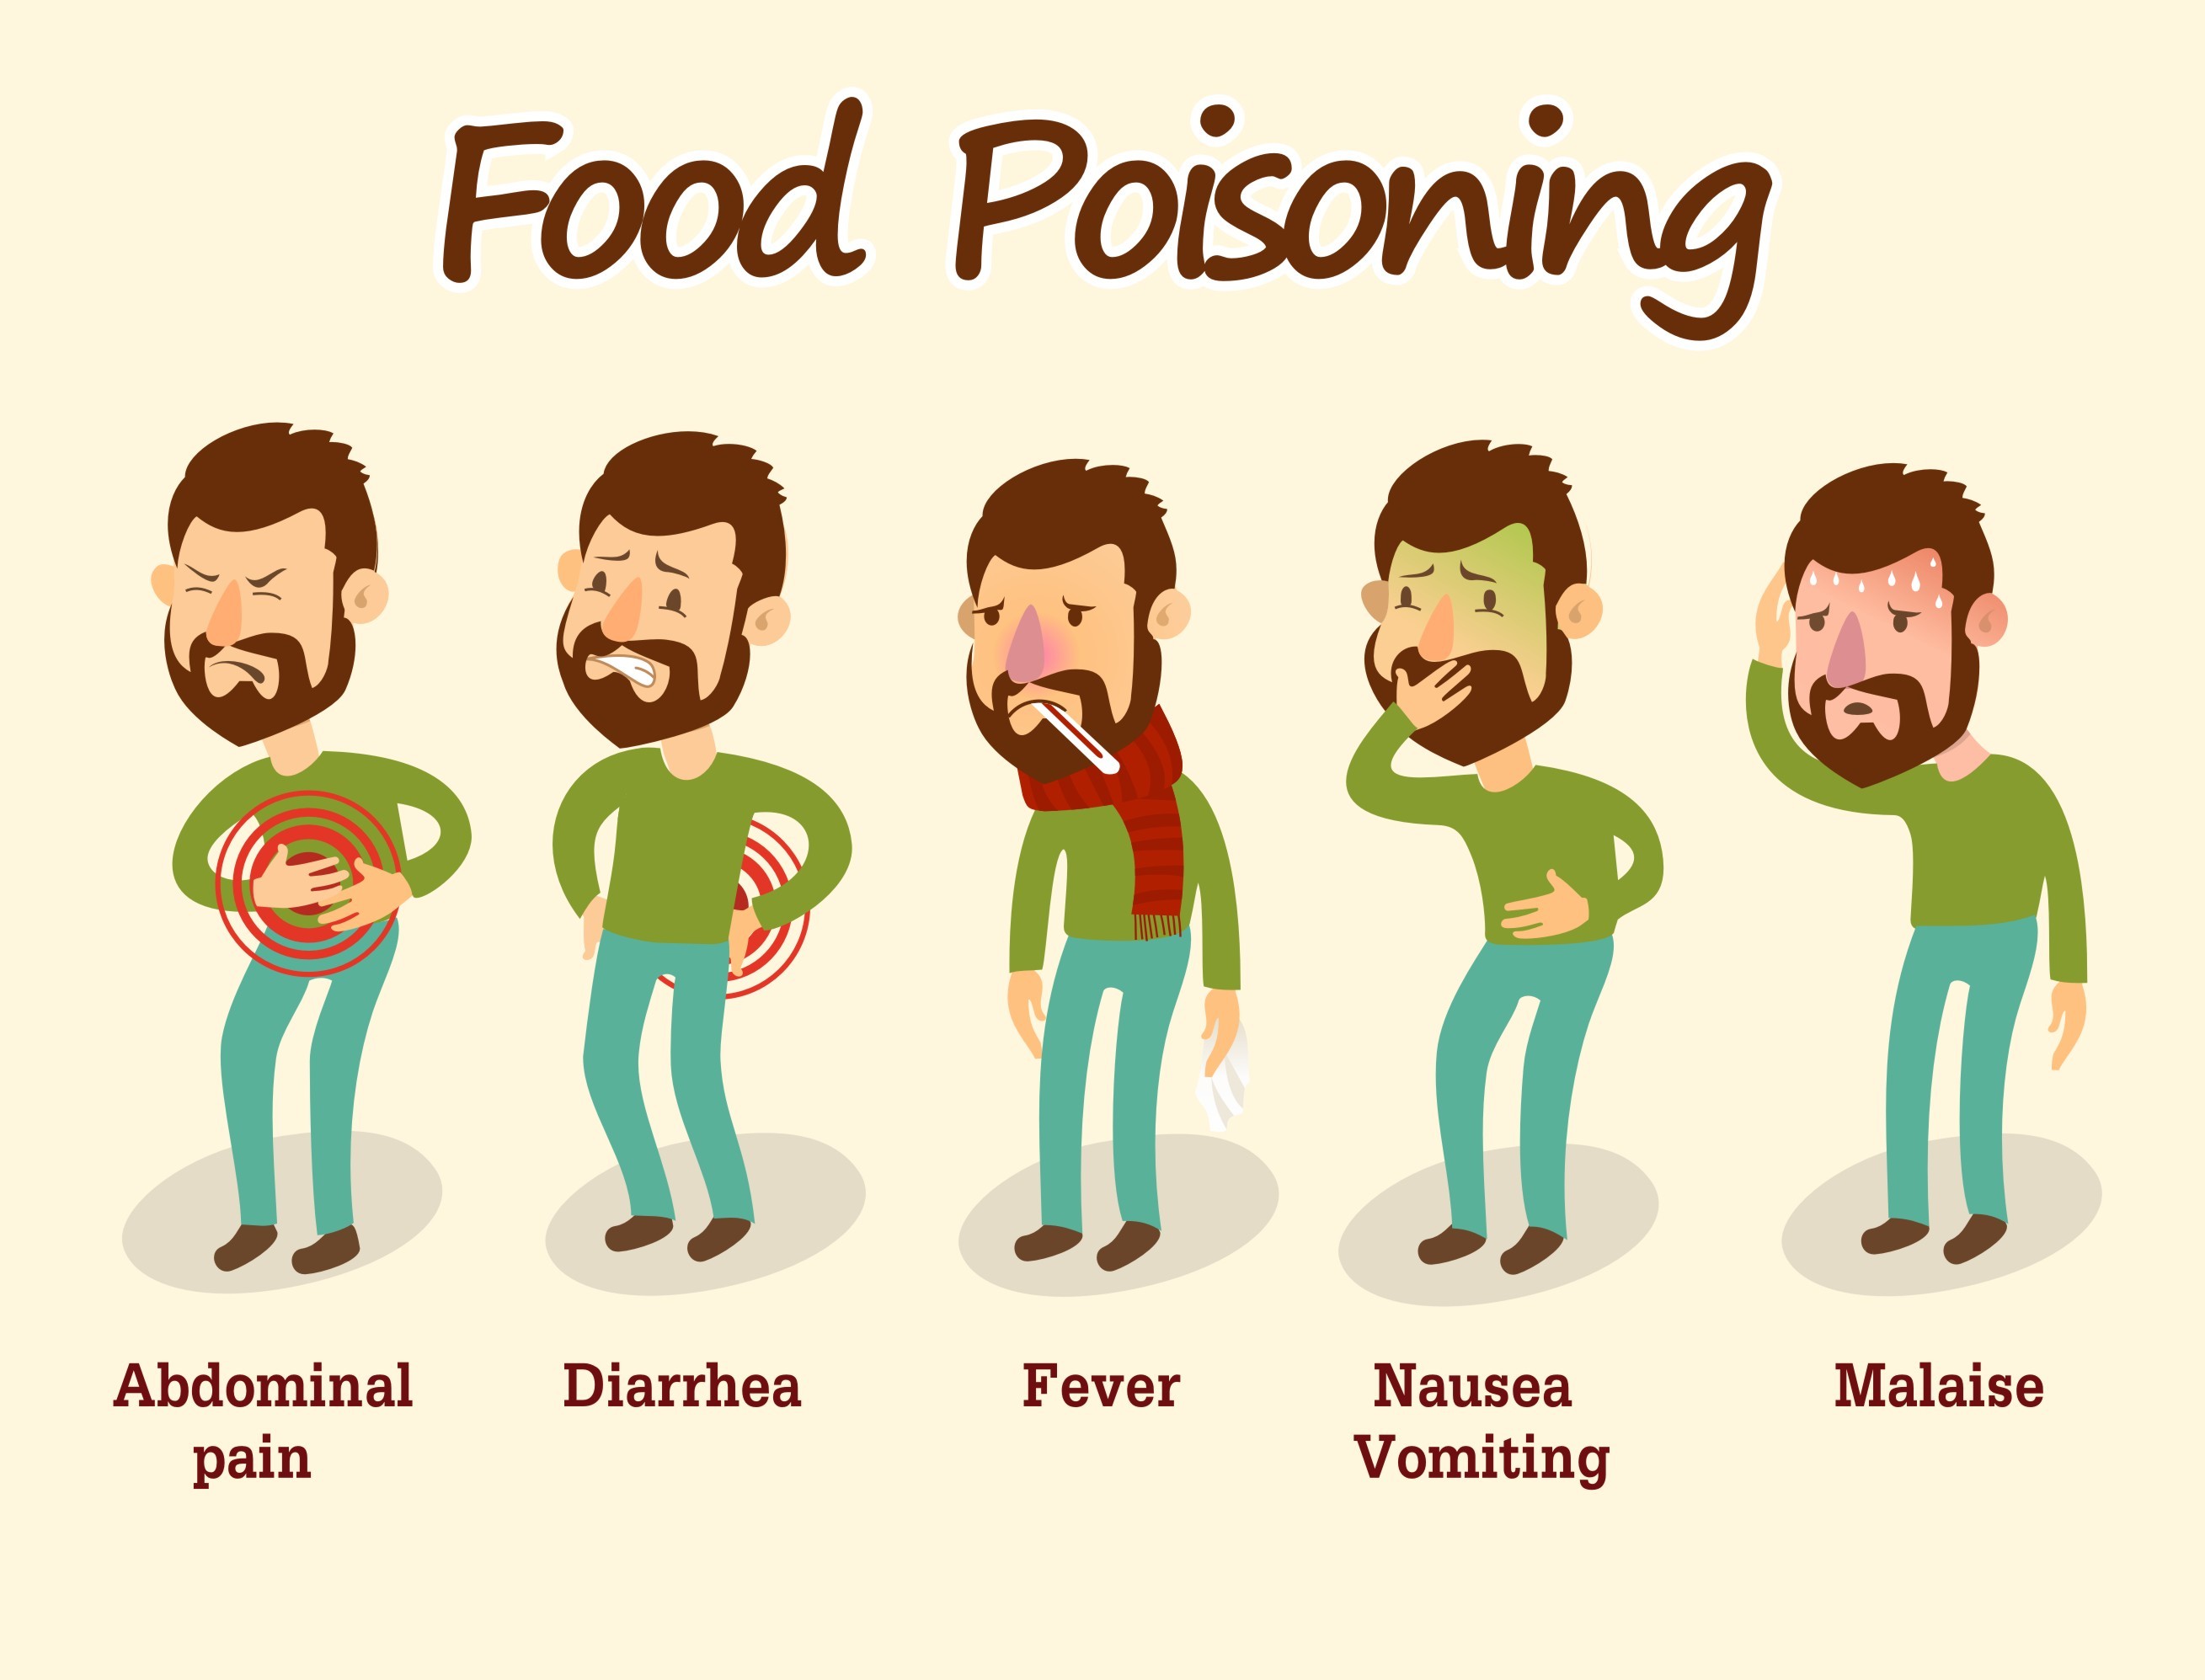 Food poisoning Causes, signs, symptoms, diagnosis and treatment